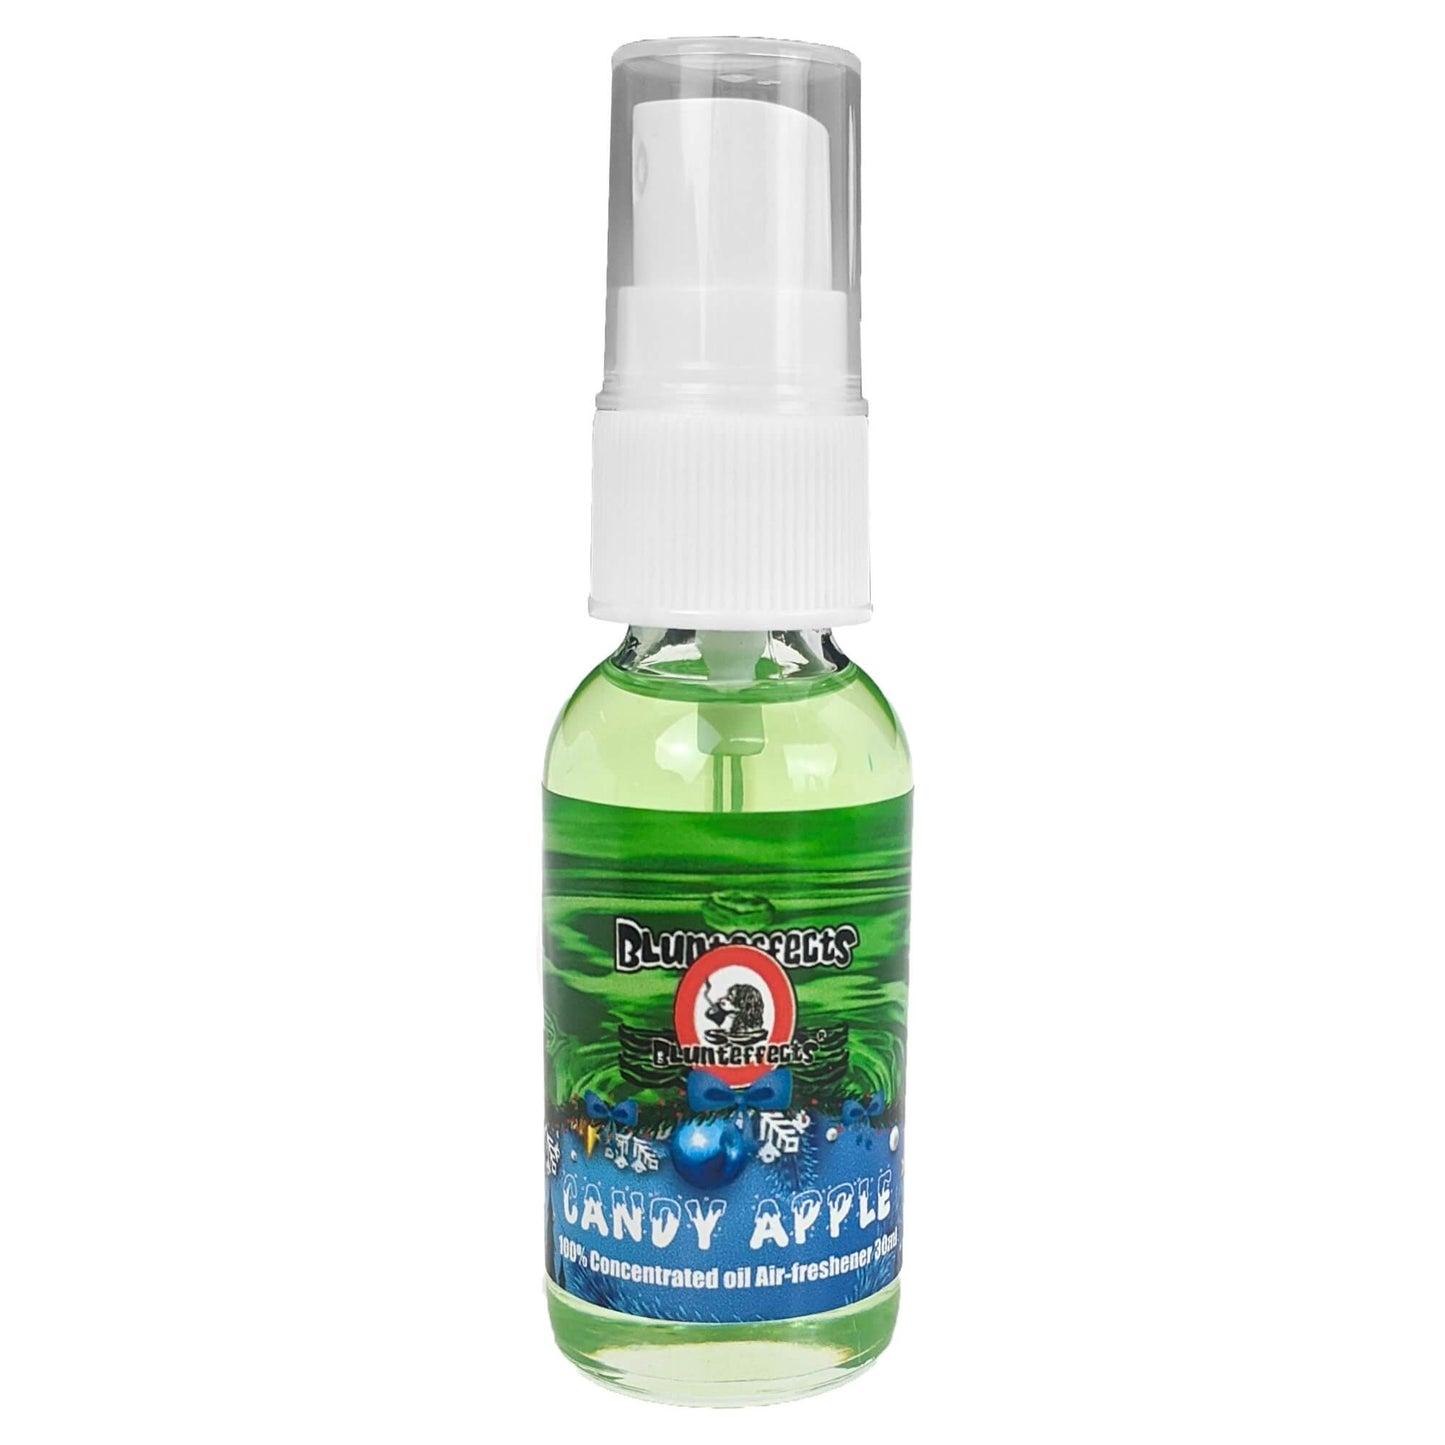 BluntEffects Air Freshener Spray, 1OZ Candy Apple LIMITED EDITION Scent